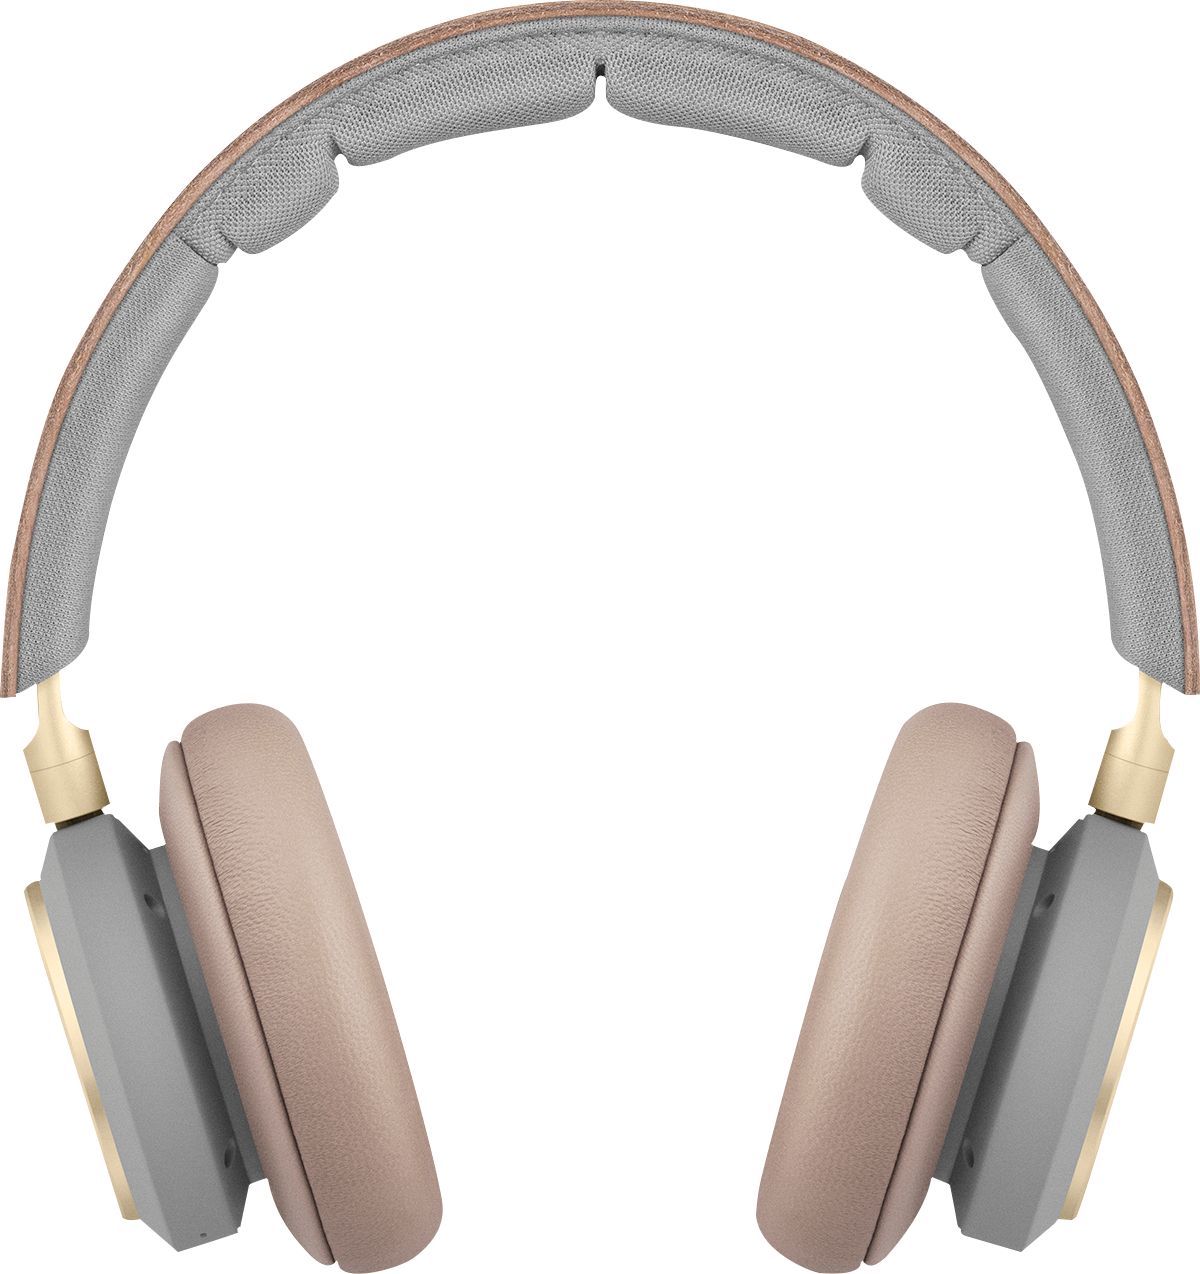 Angle View: Bang & Olufsen - Beoplay H9 3rd Generation Wireless Noise Cancelling Over-the-Ear Headphones - Argilla Bright